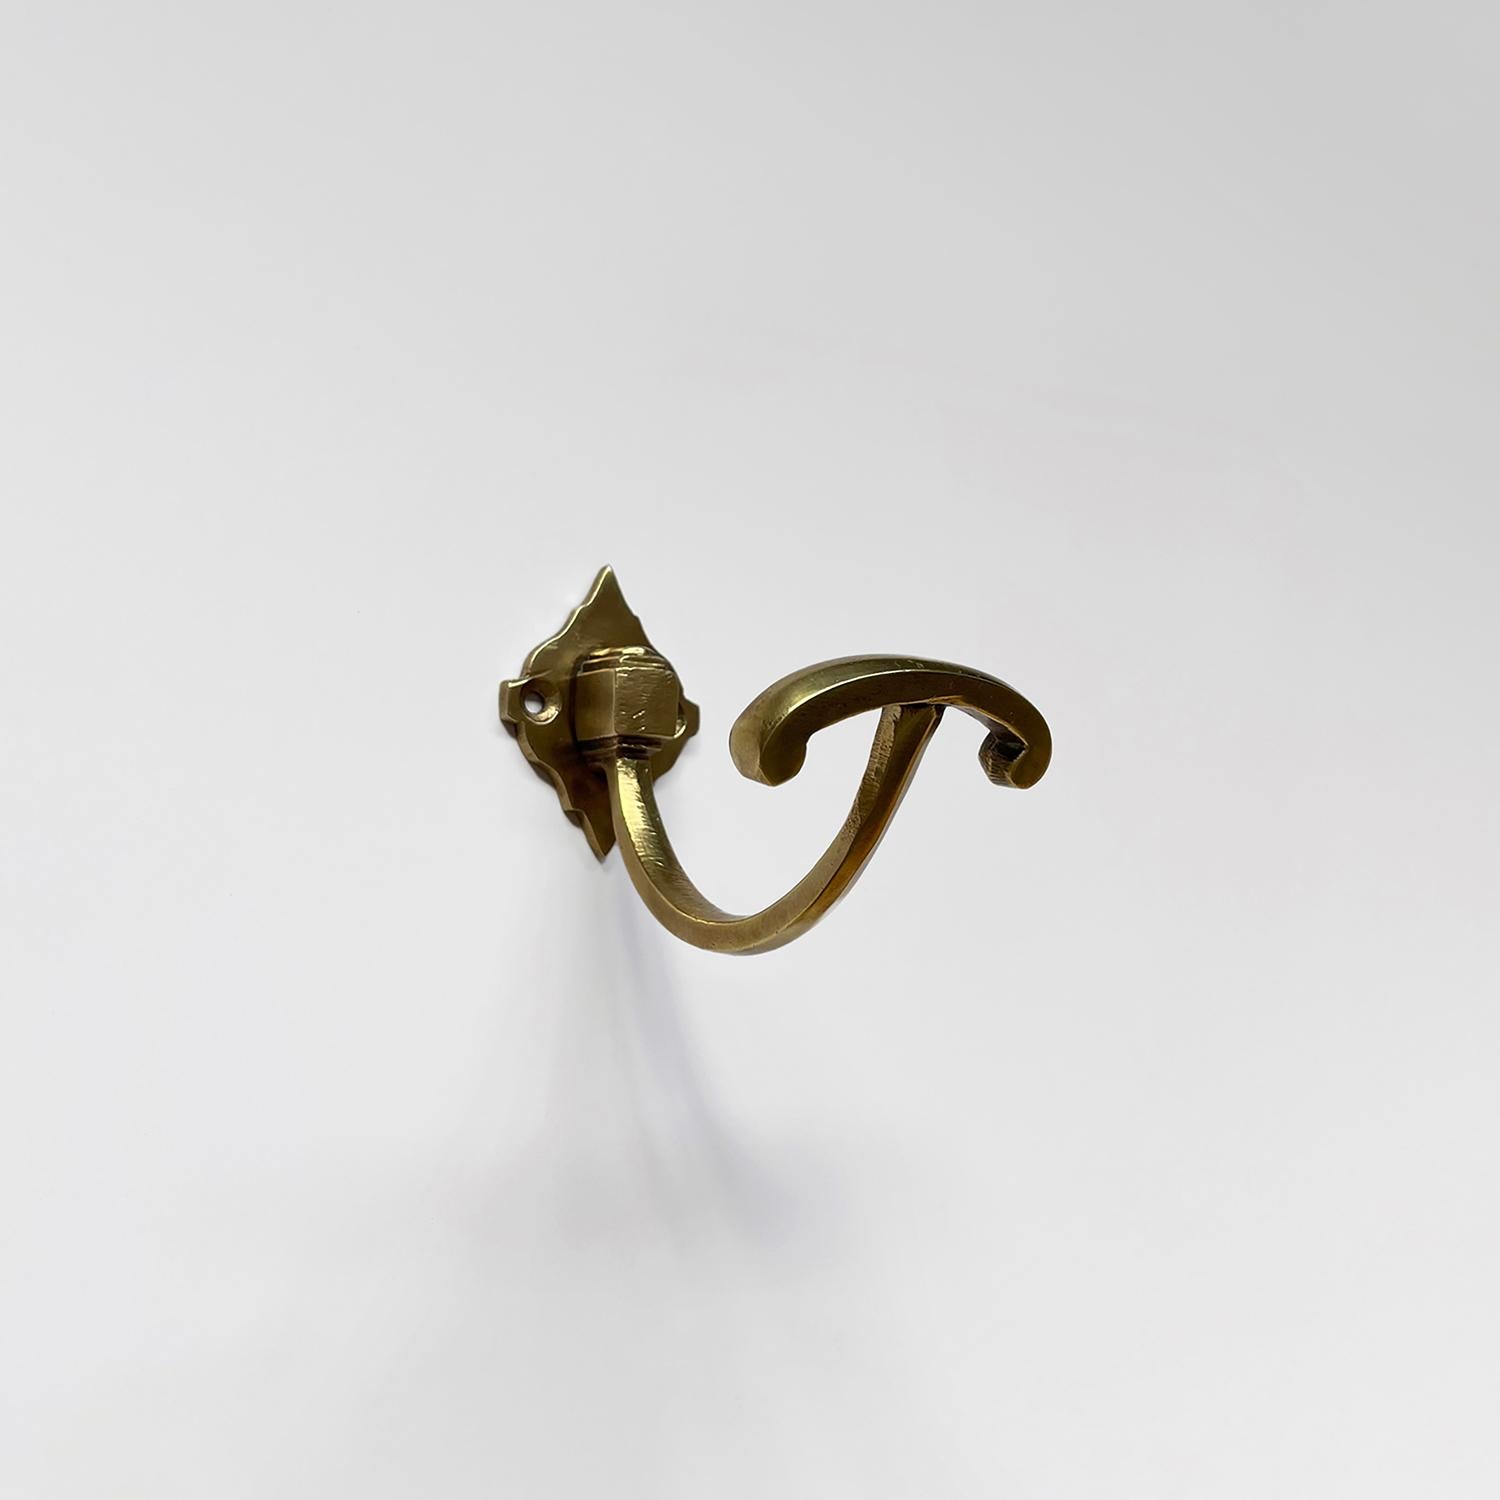 Petite French brass single wall hook
France, mid century
Single J hook is supported by a platform base and finished with an arched storage hook
Wall mounted hook is supported by a single diamond shaped bracket which requires two screws
Patina from